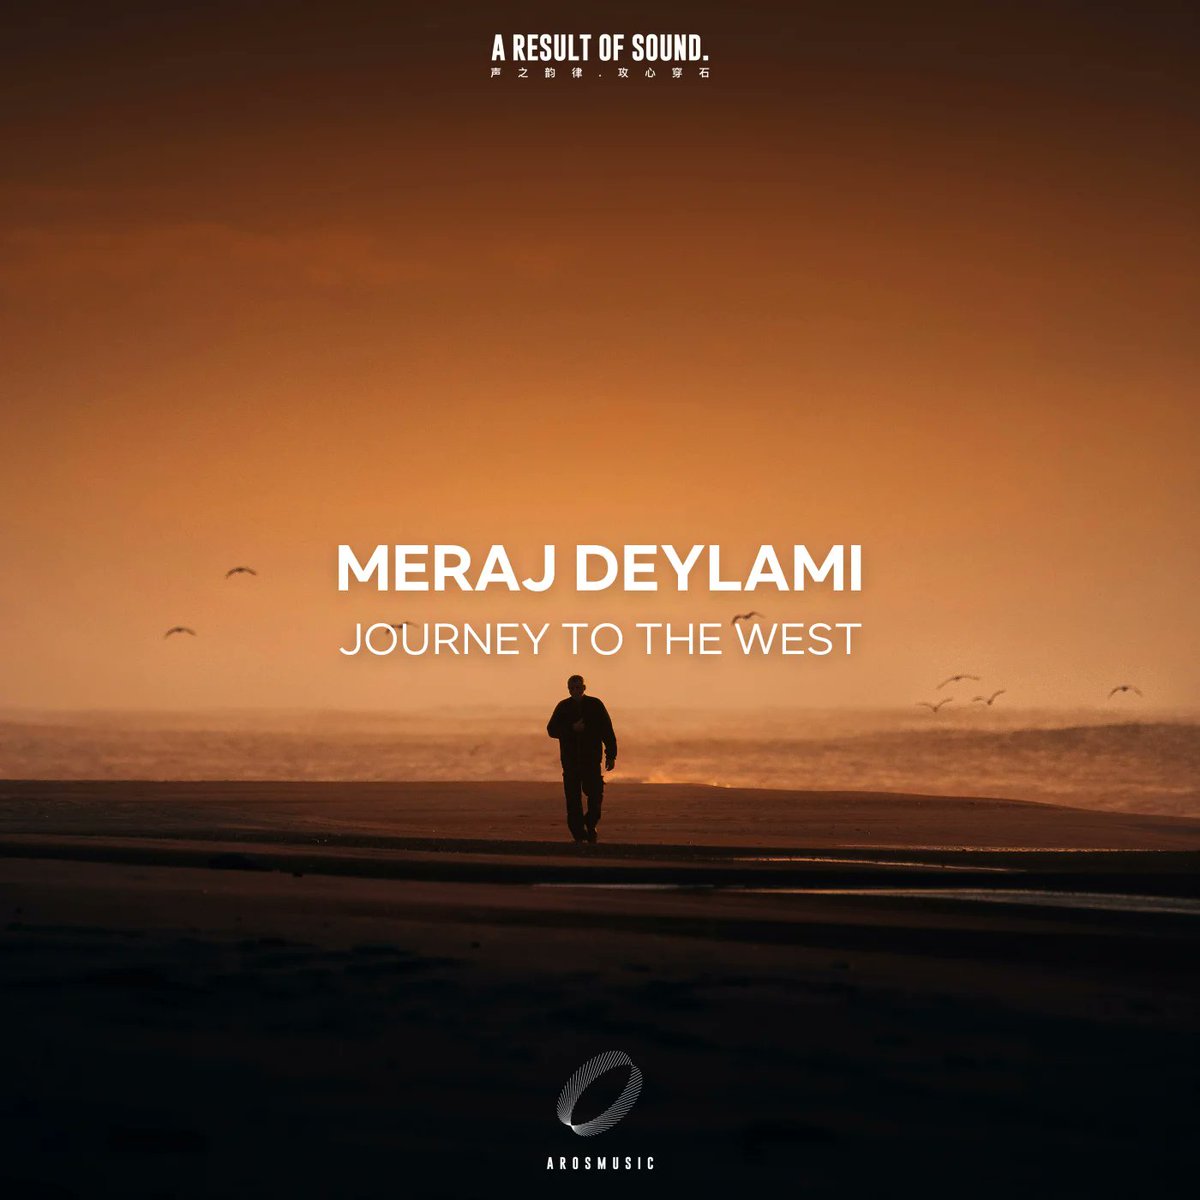 #NowPlaying #GalaxiaMusicPodcast013 Played: @ceavictor @PlayTranceRadio🔊playtrance.com 05. @MerajDeylami - Journey to the West [@AROS_MUSIC] #NewMusic #Trance #TranceFamily